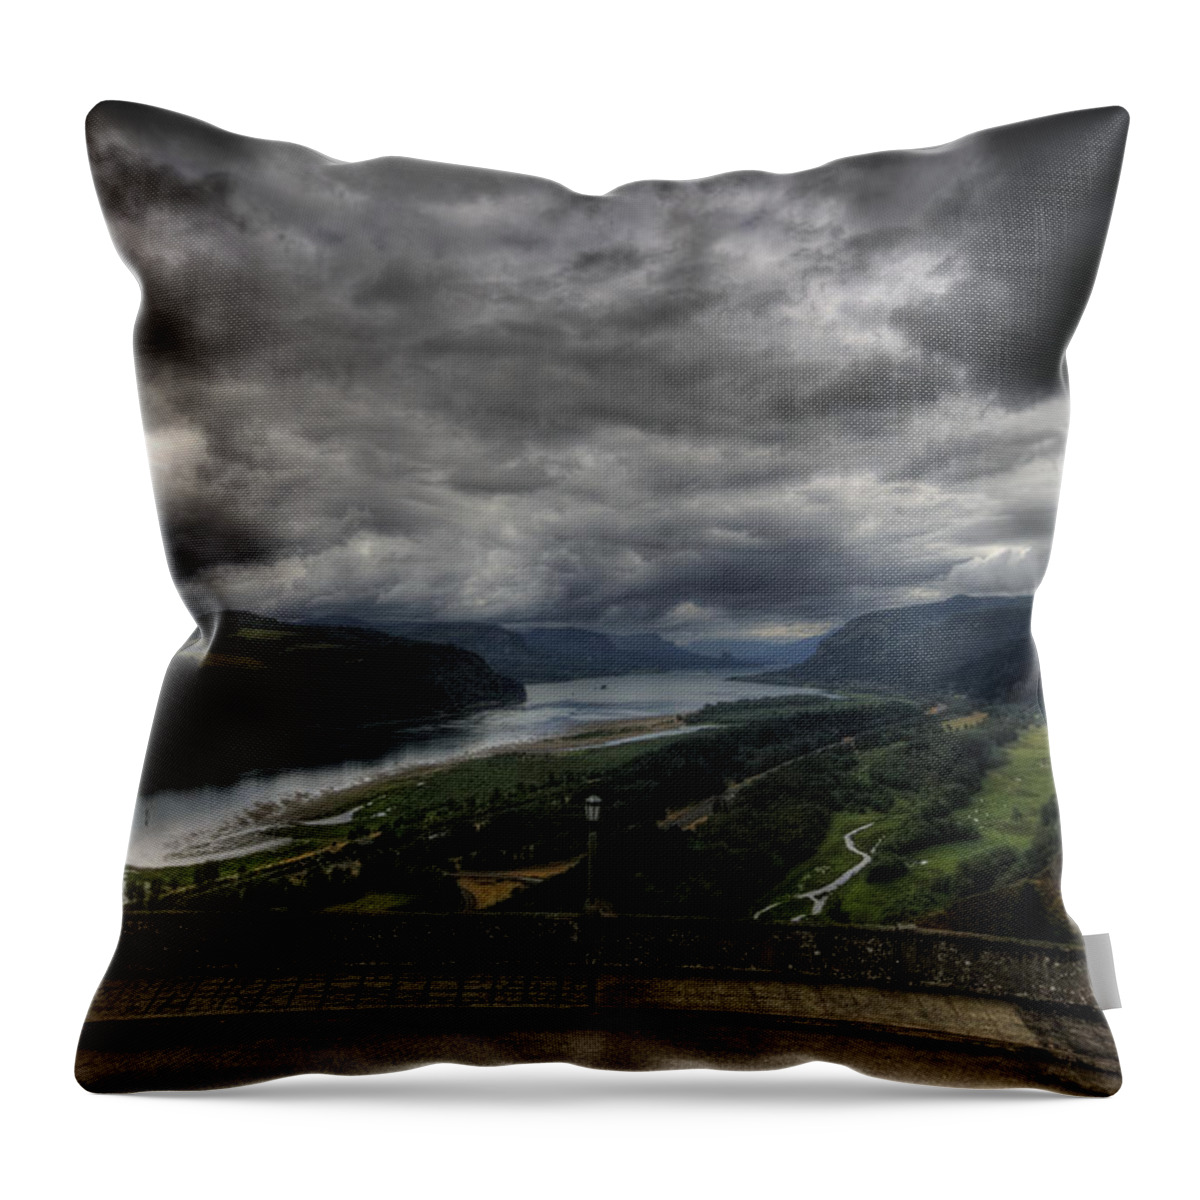 Hdr Throw Pillow featuring the photograph Vista House View by Brad Granger